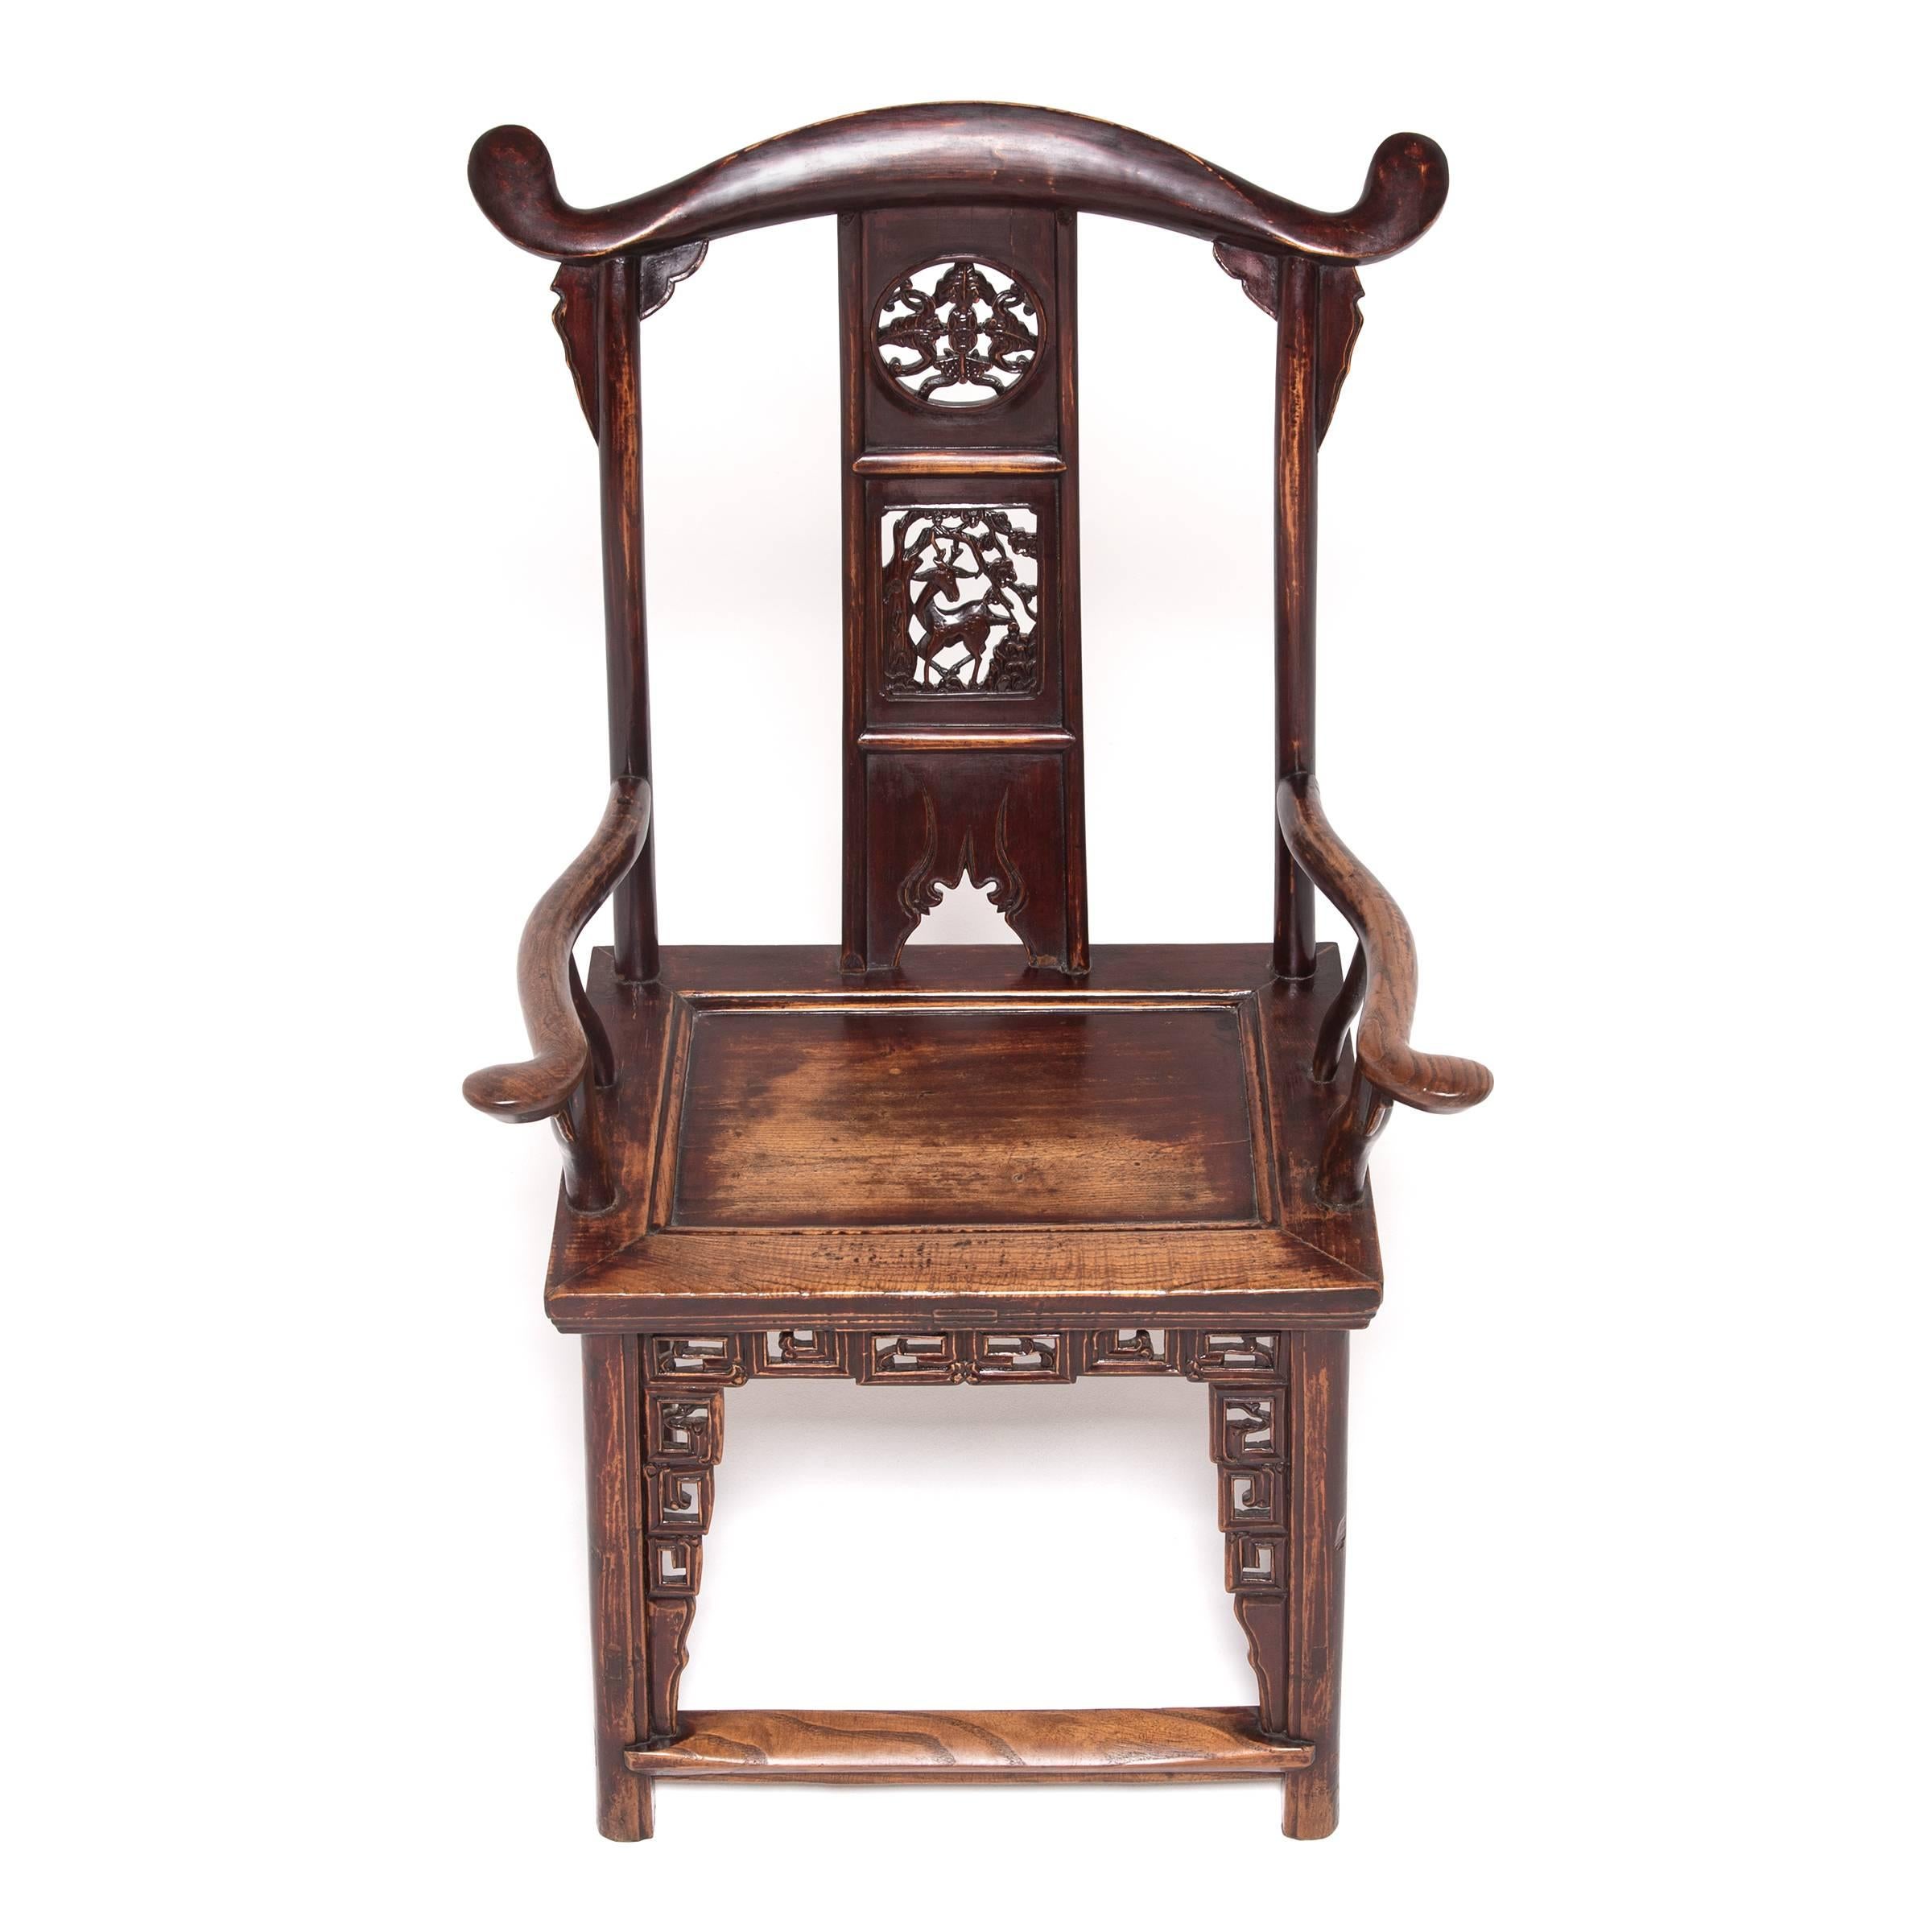 19th Century Pair of Chinese Tall Back Chairs with Auspicious Deer Medallions, c. 1850